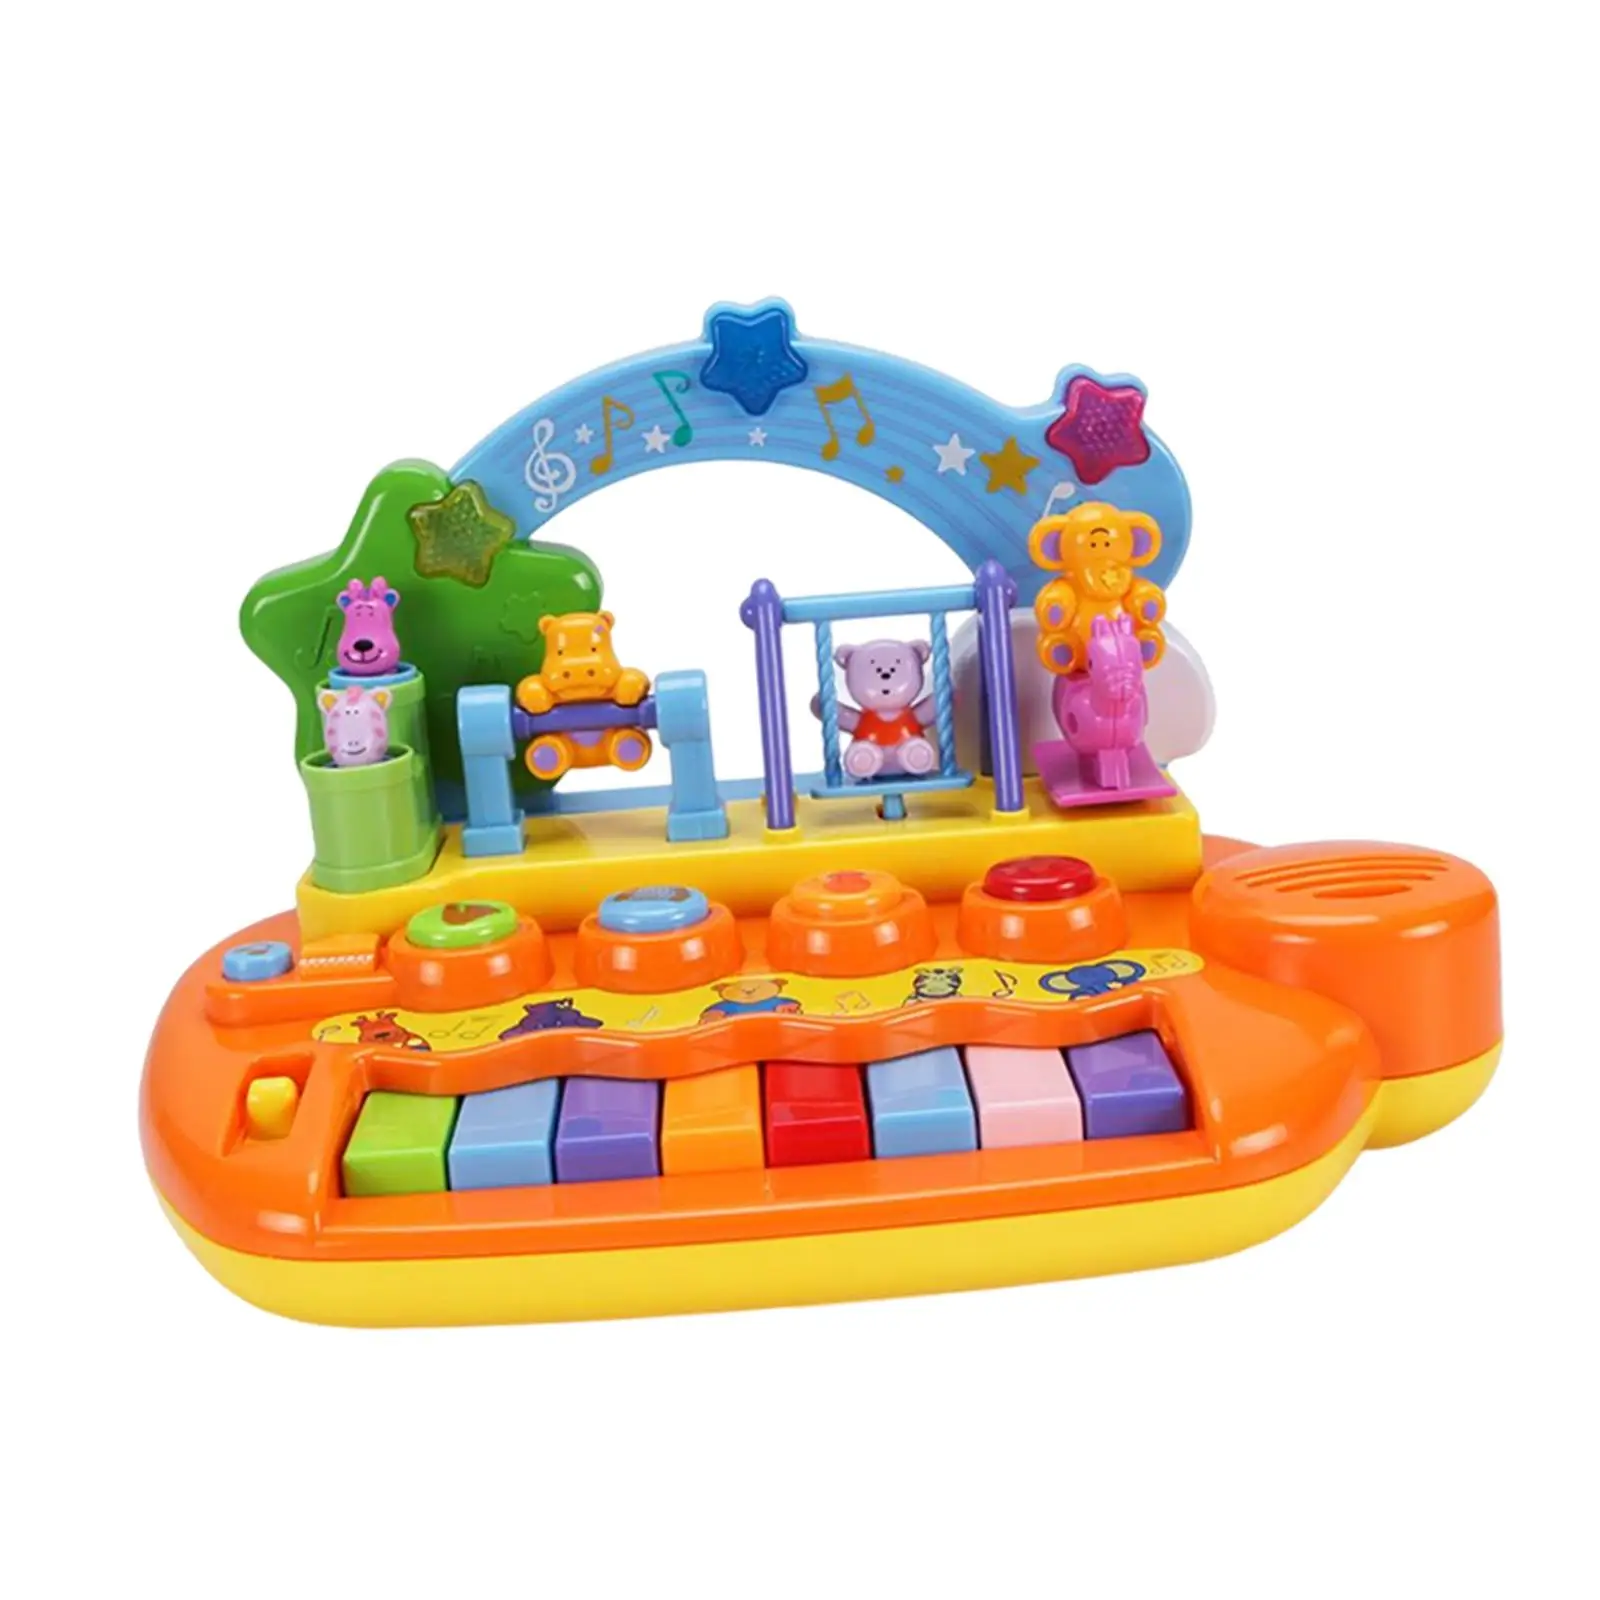 Portable Musical Piano Toy Early Education Activity Toy for Boys Toddlers